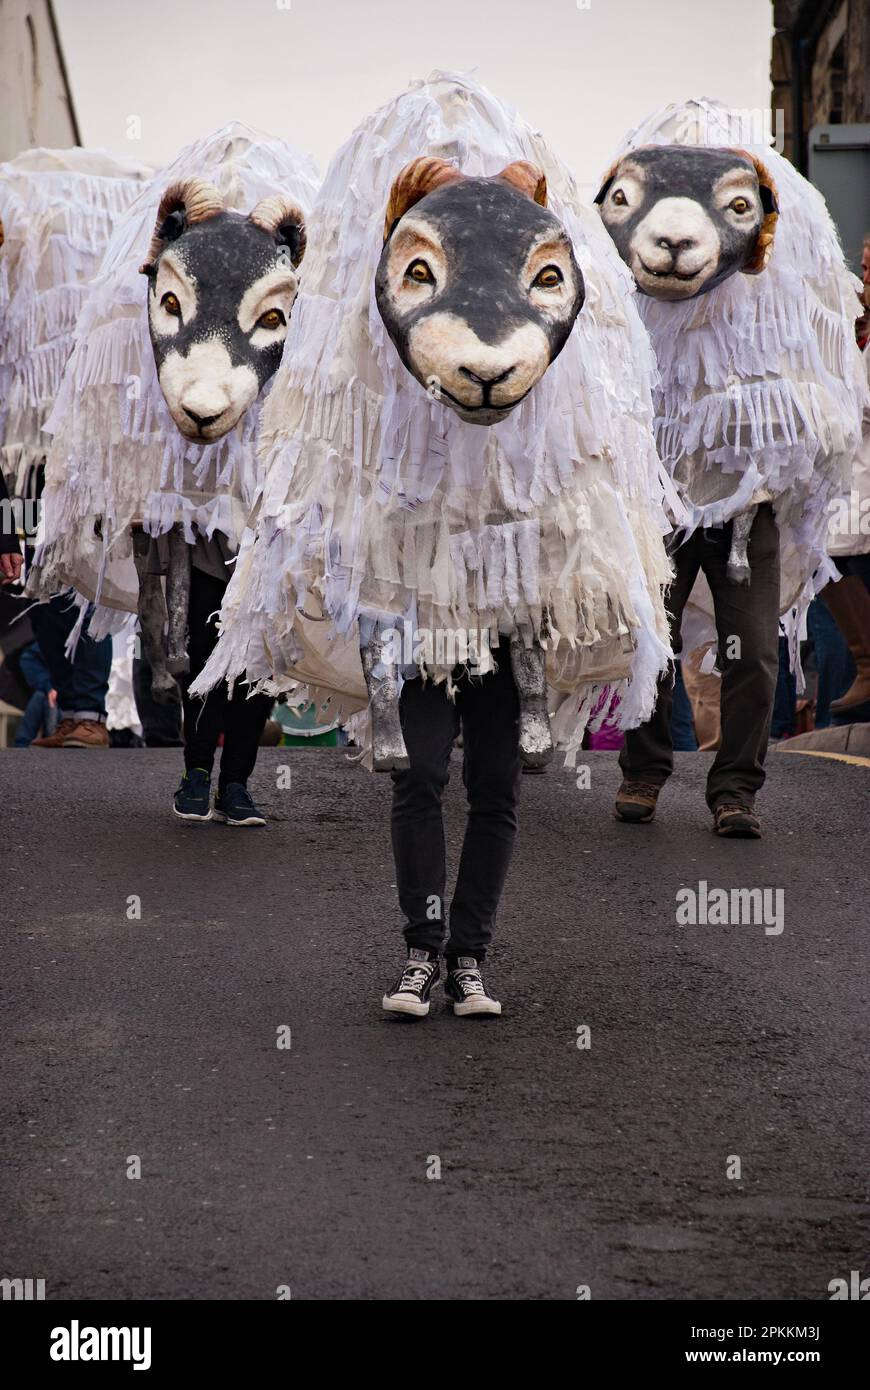 Giant Swaledale sheep entertaining the crowds at the Skipton Puppet Festival in 2015. Stock Photo